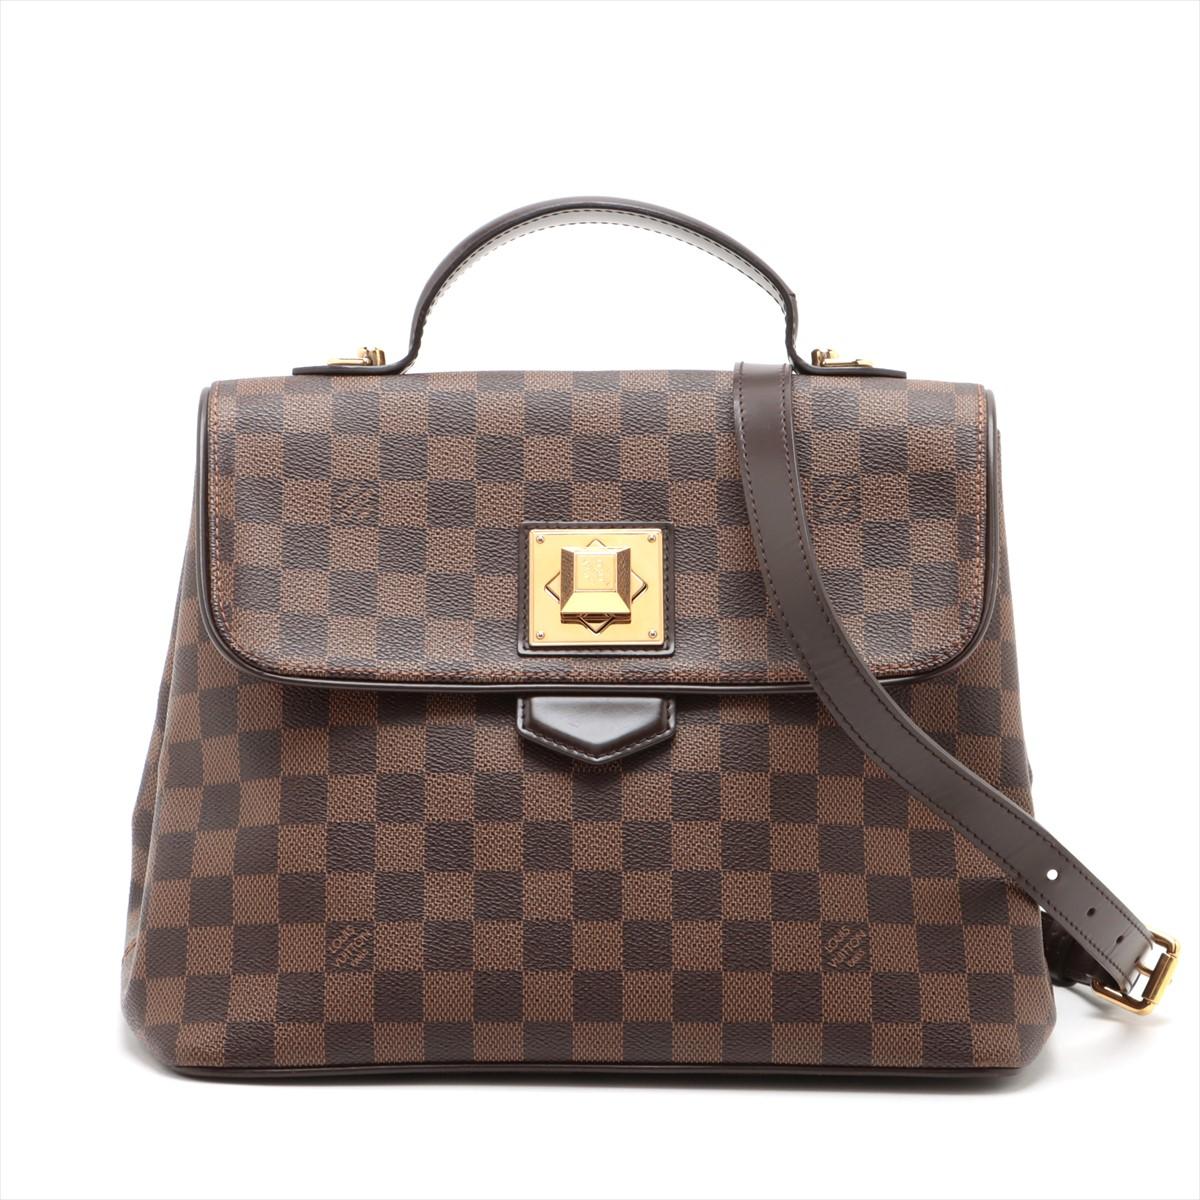 The Louis Vuitton Damier Ebene Bergamo MM is an exquisite handbag that seamlessly combines sophistication with practicality. Crafted from the iconic Damier Ebene canvas, the bag showcases Louis Vuitton's signature checkered pattern in rich brown